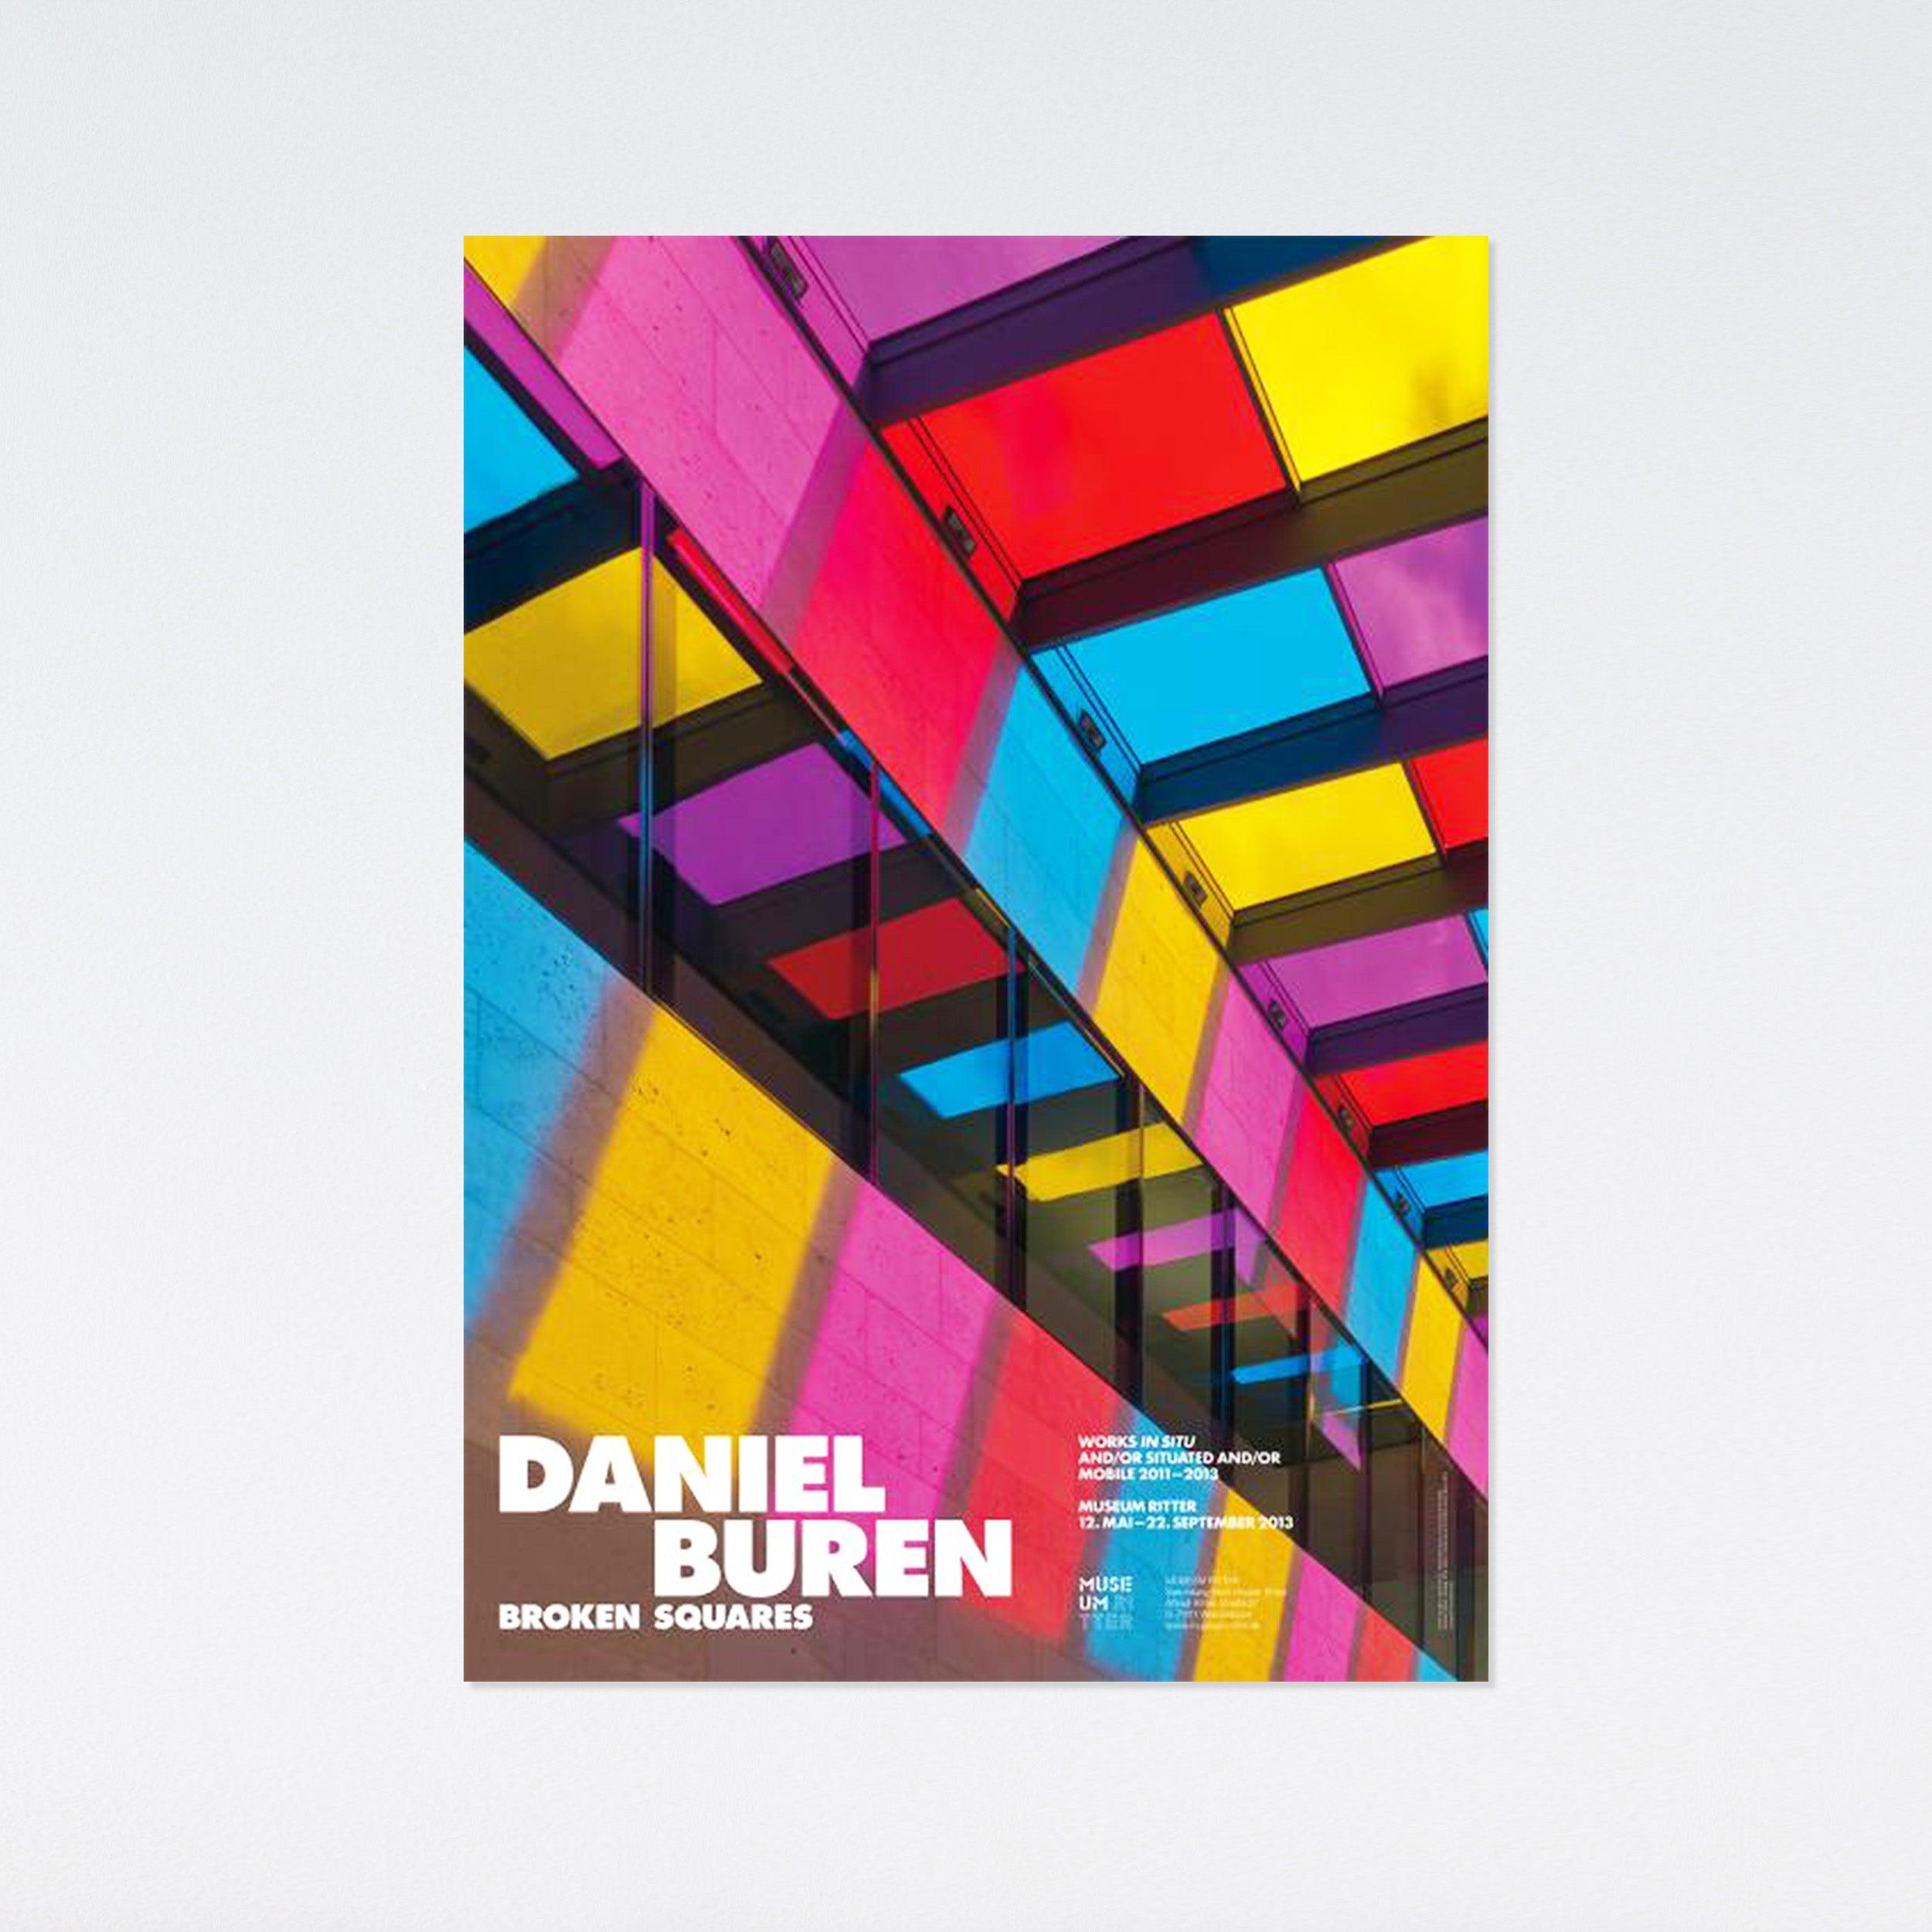 A large museum exhibition poster published by Ritter Museum in Germany.

32.87 x 23.23 in
83.5 x 59 cm

Unframed poster will ship rolled in a protected mailing tube.

Daniel Buren is a French conceptual artist, painter, and sculptor. He has won